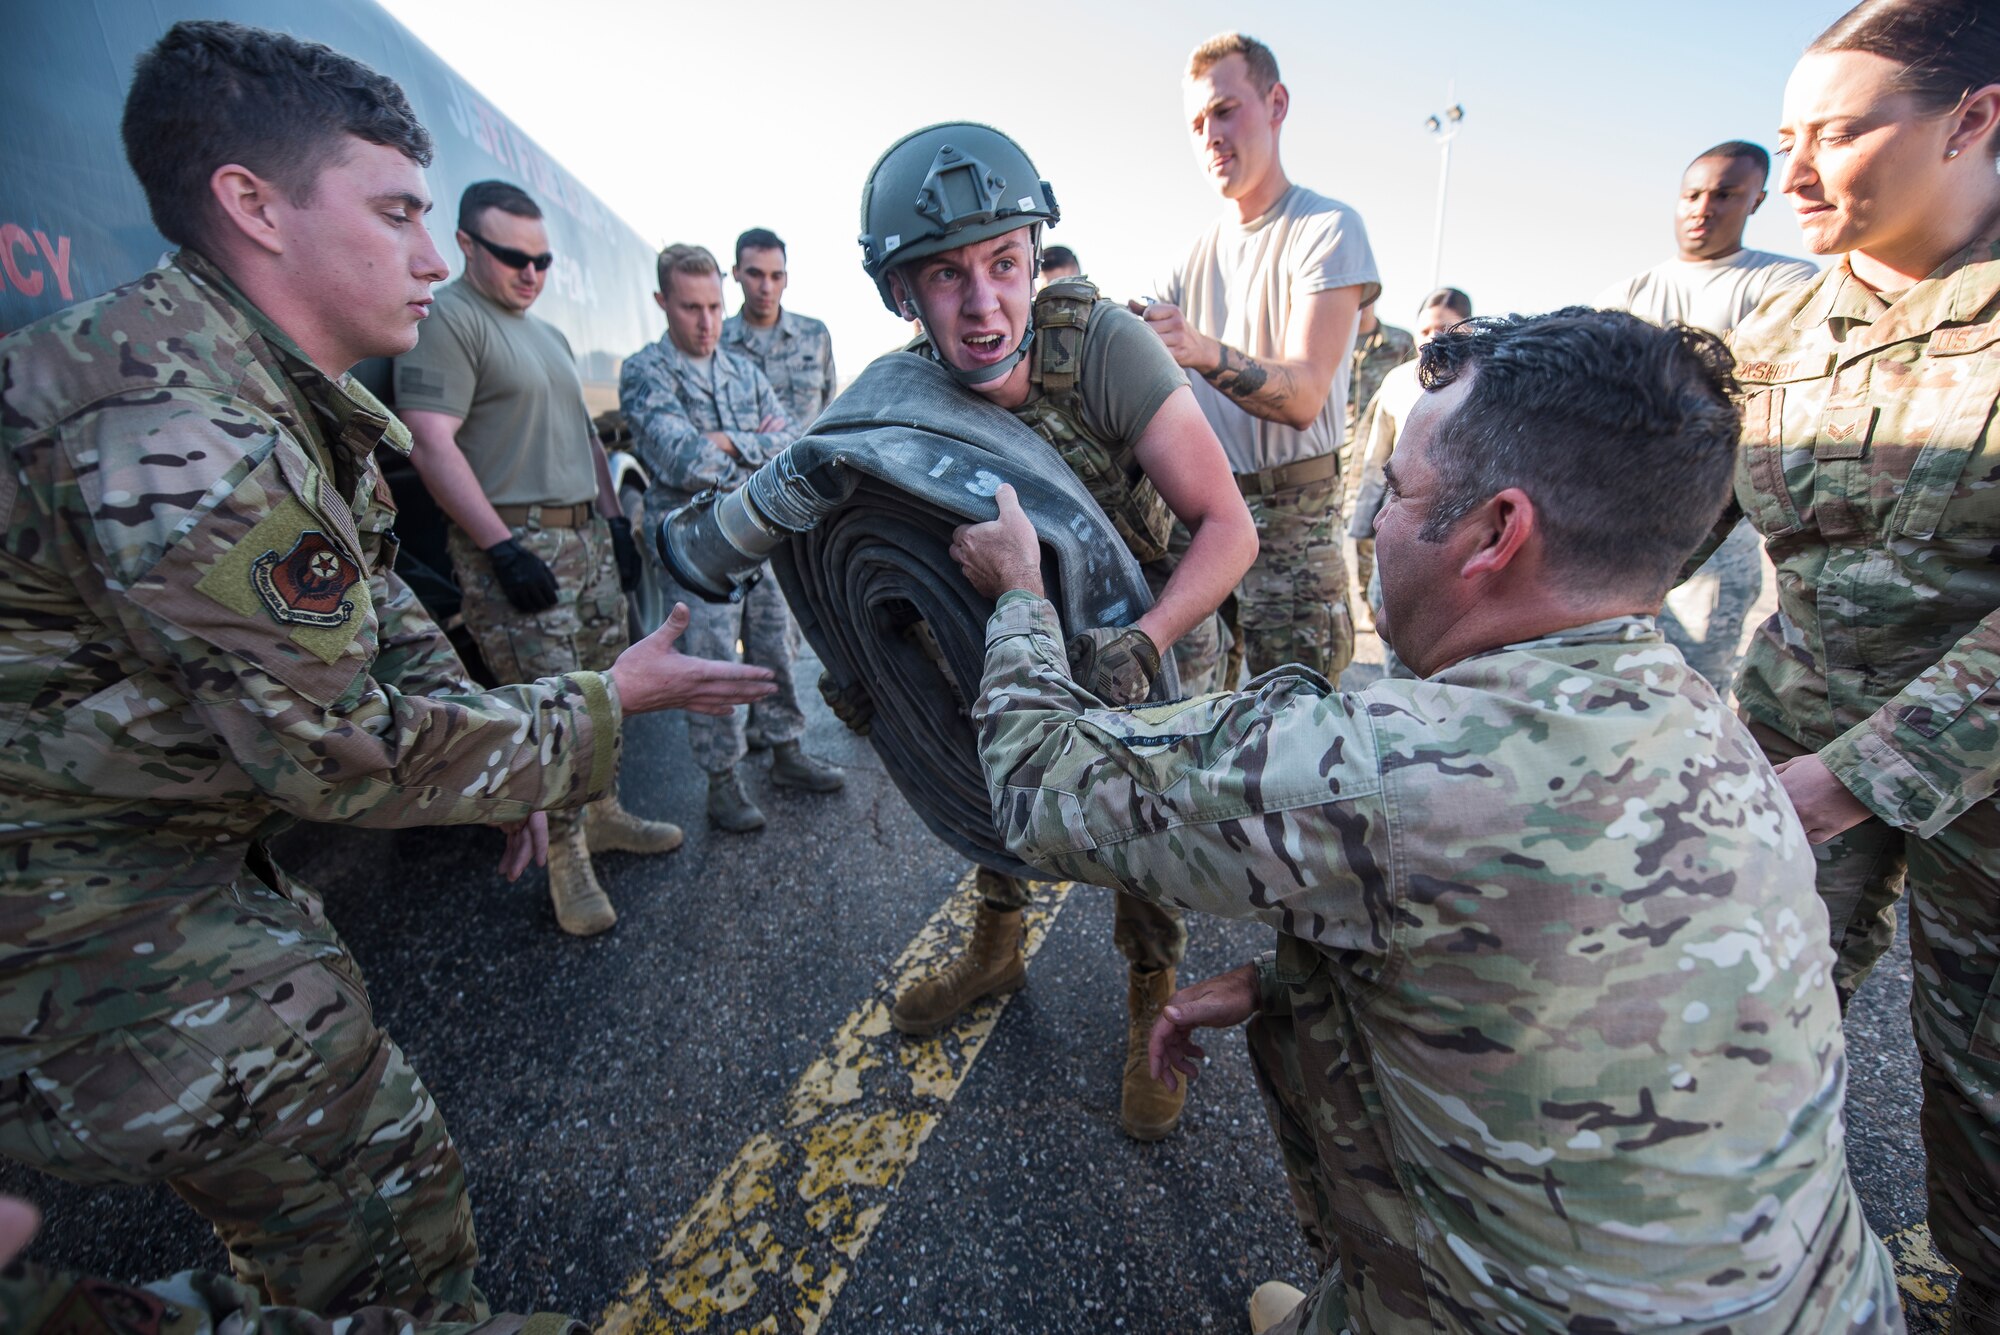 Airman 1st Class Caleb McDonald, 27th Special Operations Logistics Readiness Squadron fuels operator, lifts a fuel hose at the Forward Air Refueling Point tryouts at Cannon Air Force Base, N.M., October 9, 2019. During the tryouts, members do a physical test first and then are interviewed by the current FARP team. (U.S. Air Force photo by Senior Airman Vernon R. Walter III)